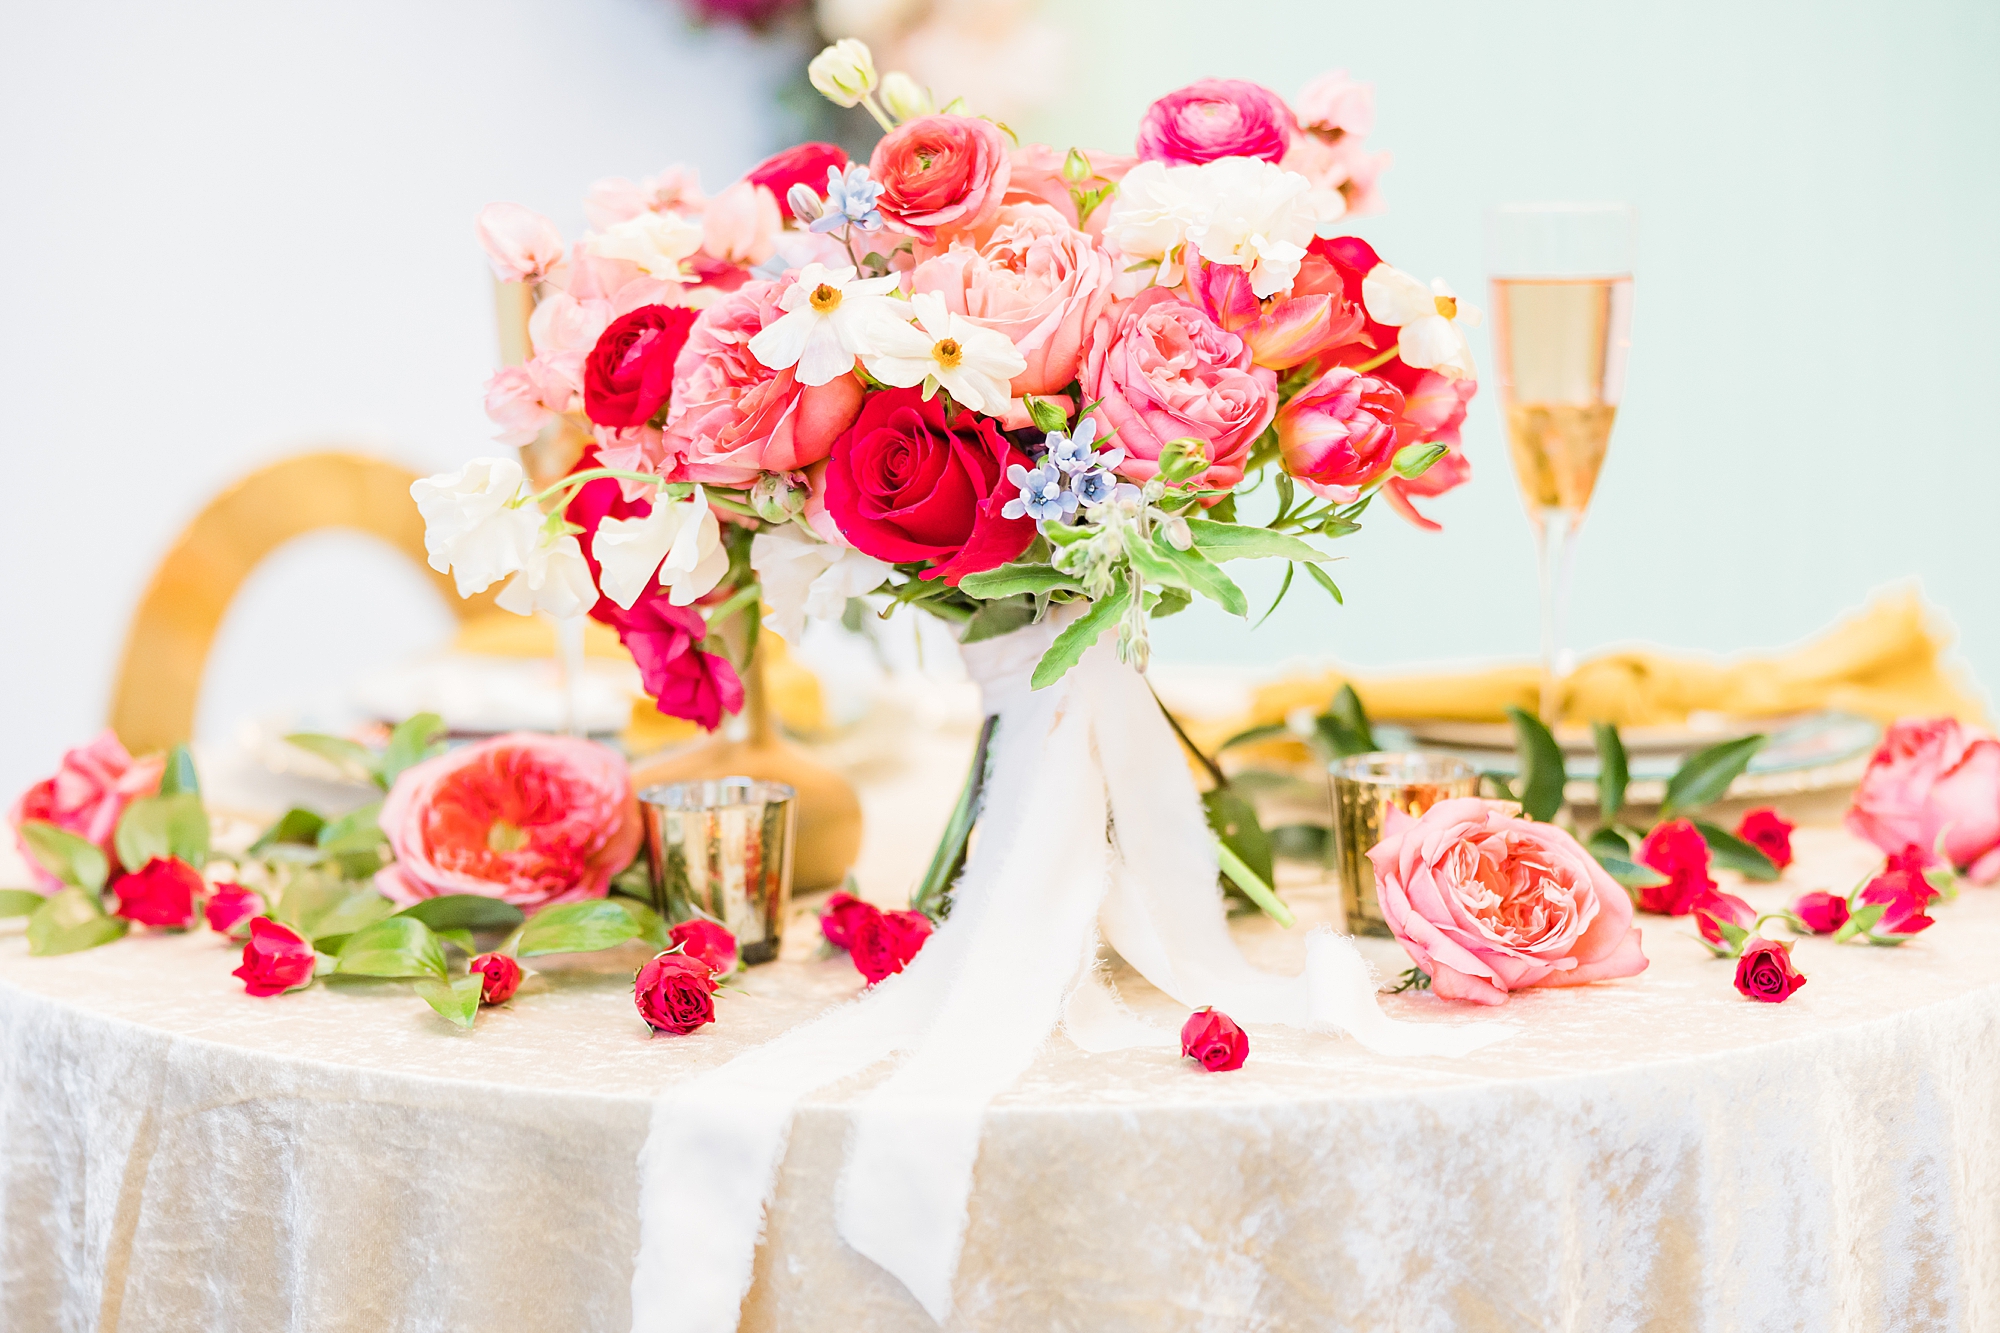 pink and red floral display on sweetheart table with gold accents 